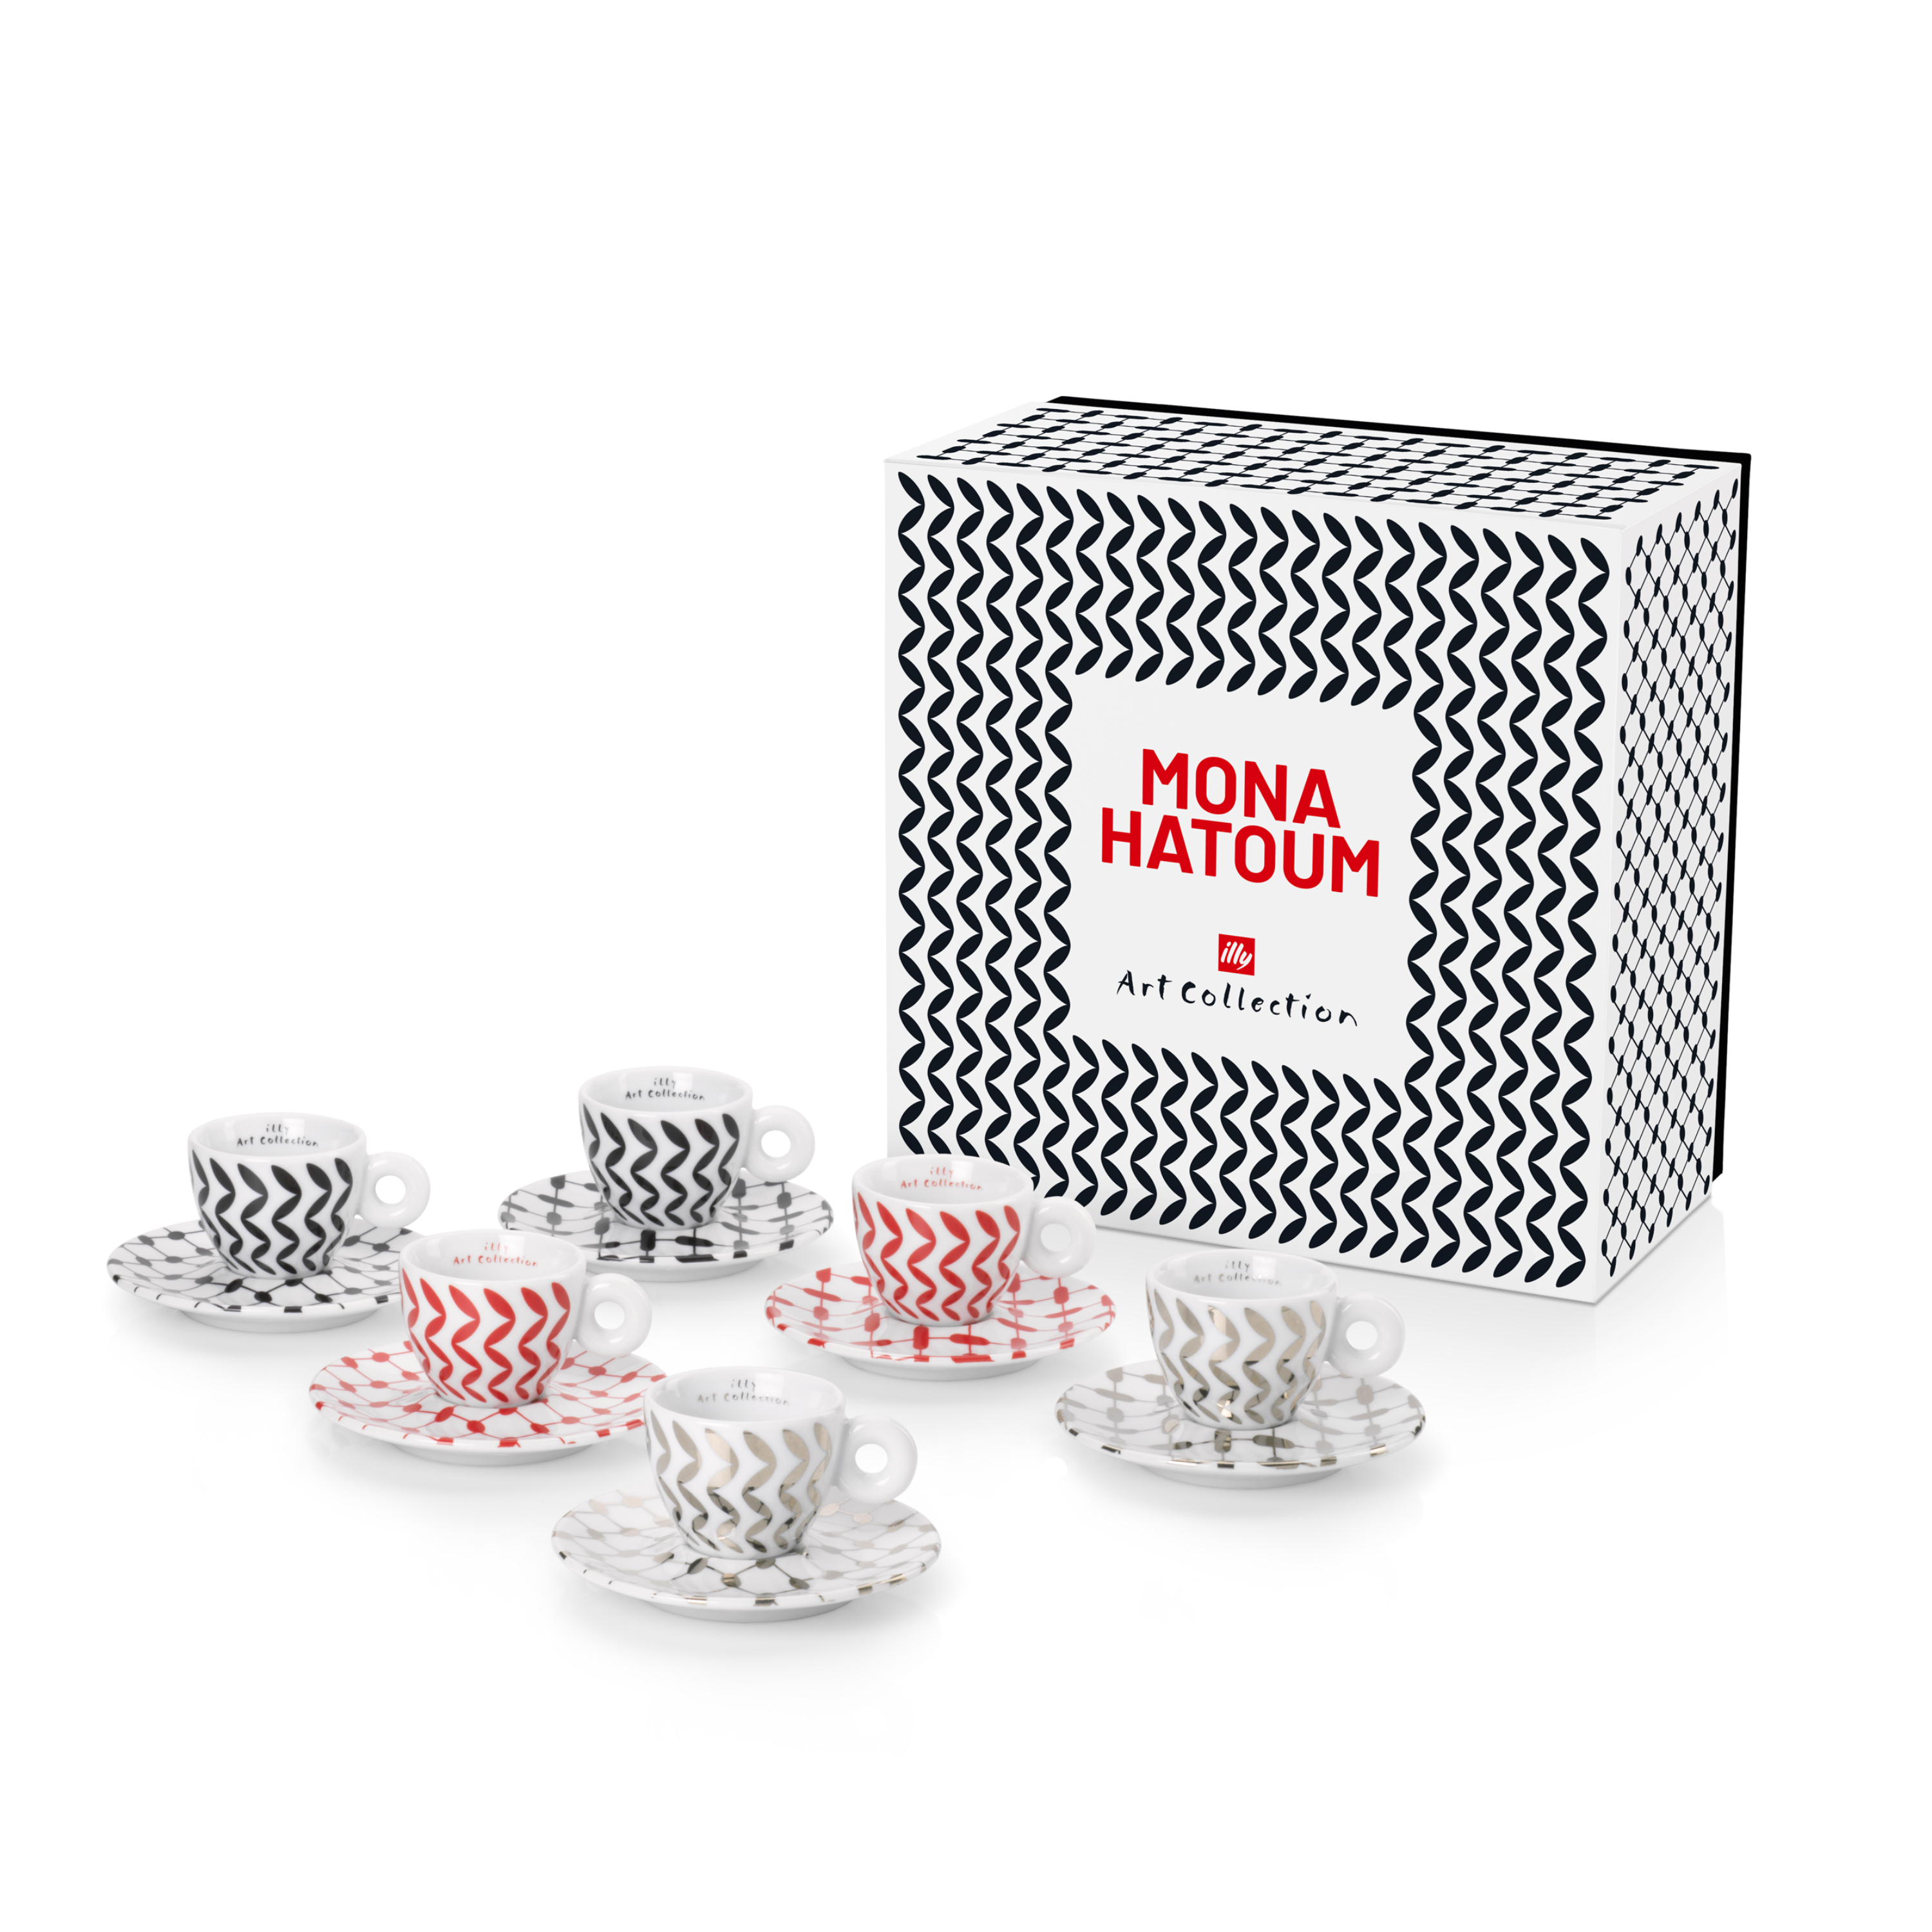 illy Art Collection MONA HATOUM Gift Set 6 Espresso Cups , Cups, 02-02-6077